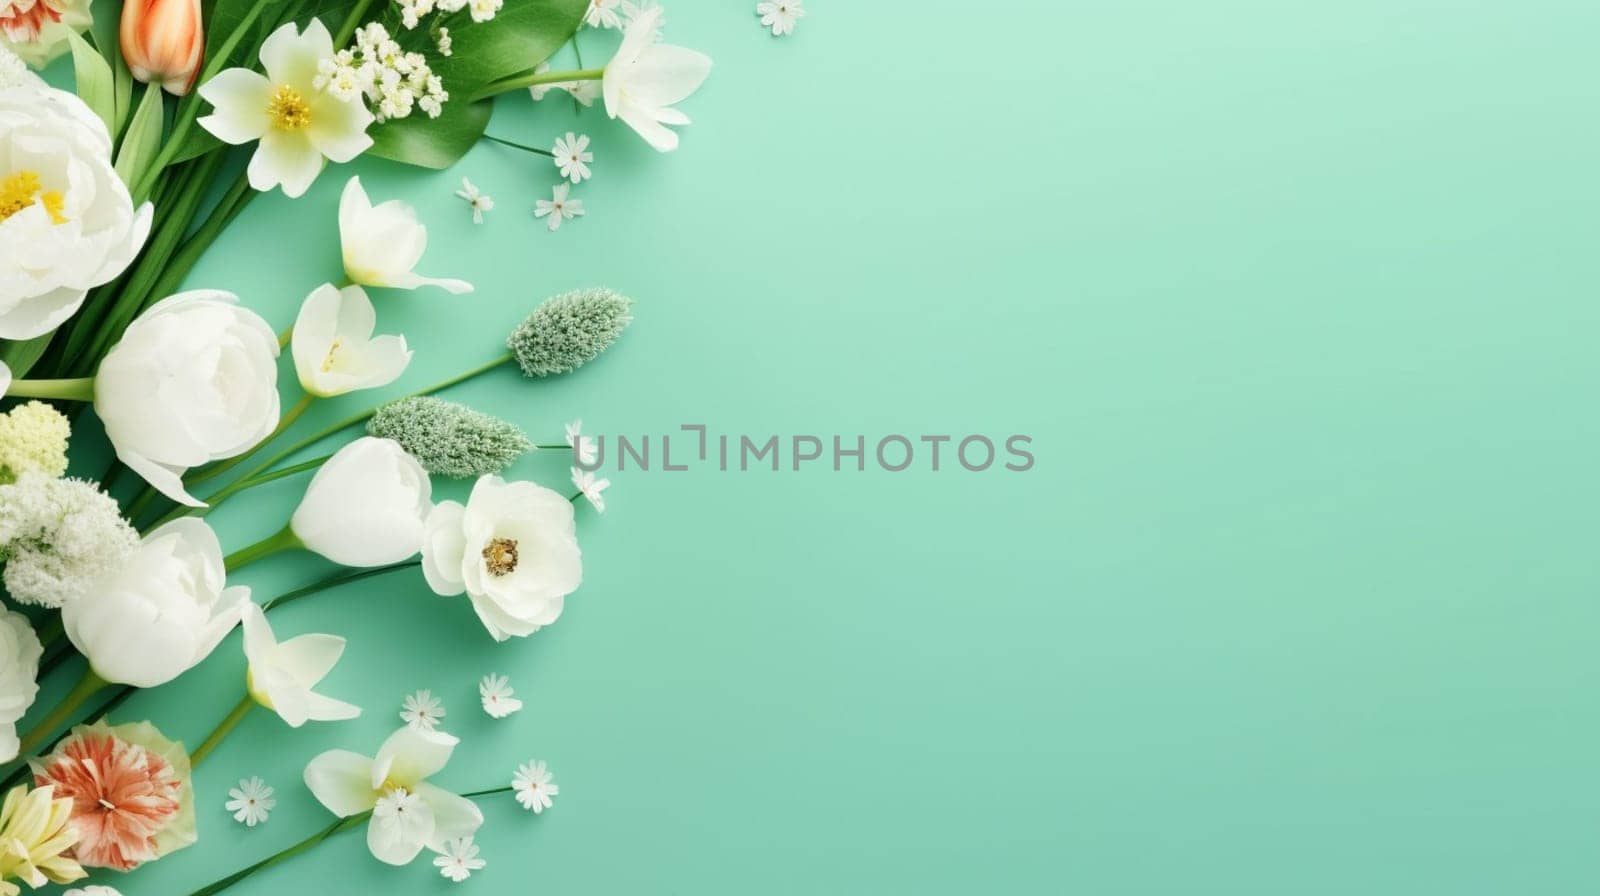 A variety of fresh flowers on a pastel green background, leaving space for text. by kizuneko